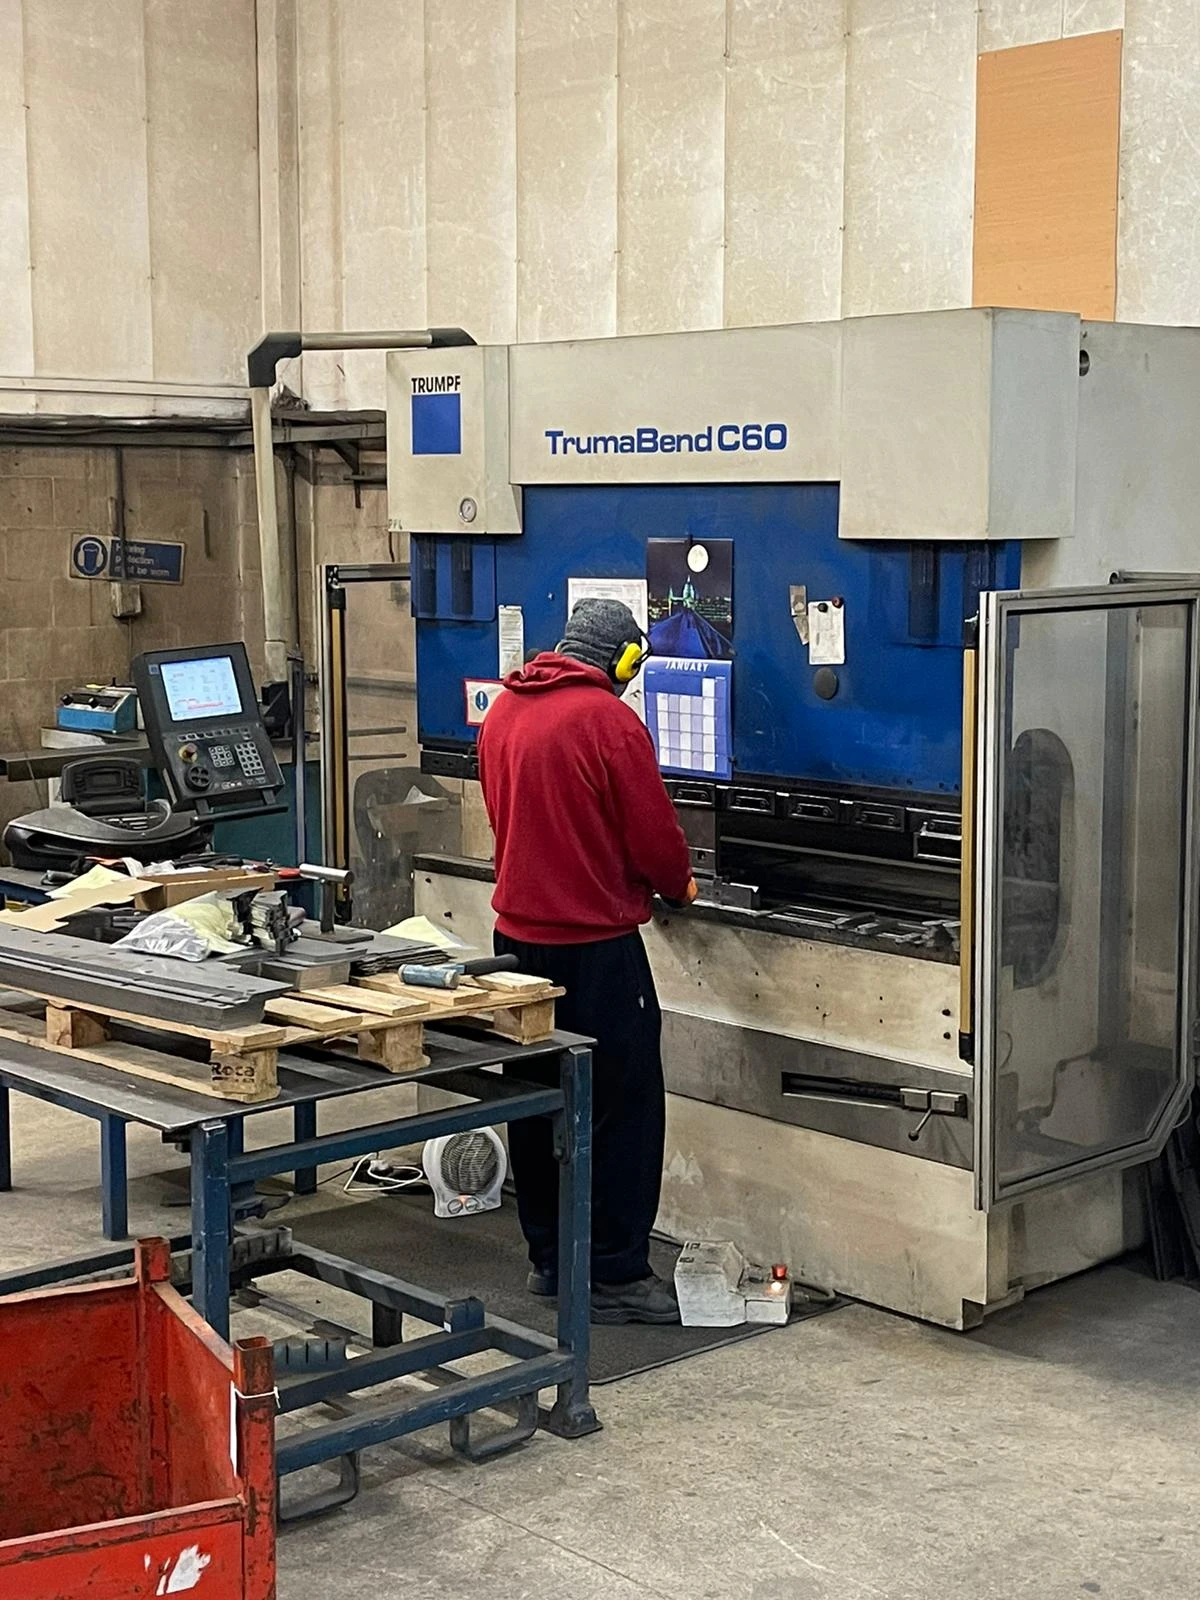 A Summit Engineering employee in blue overalls operates a 60 ton Trumpf TrumaBend C60 press.